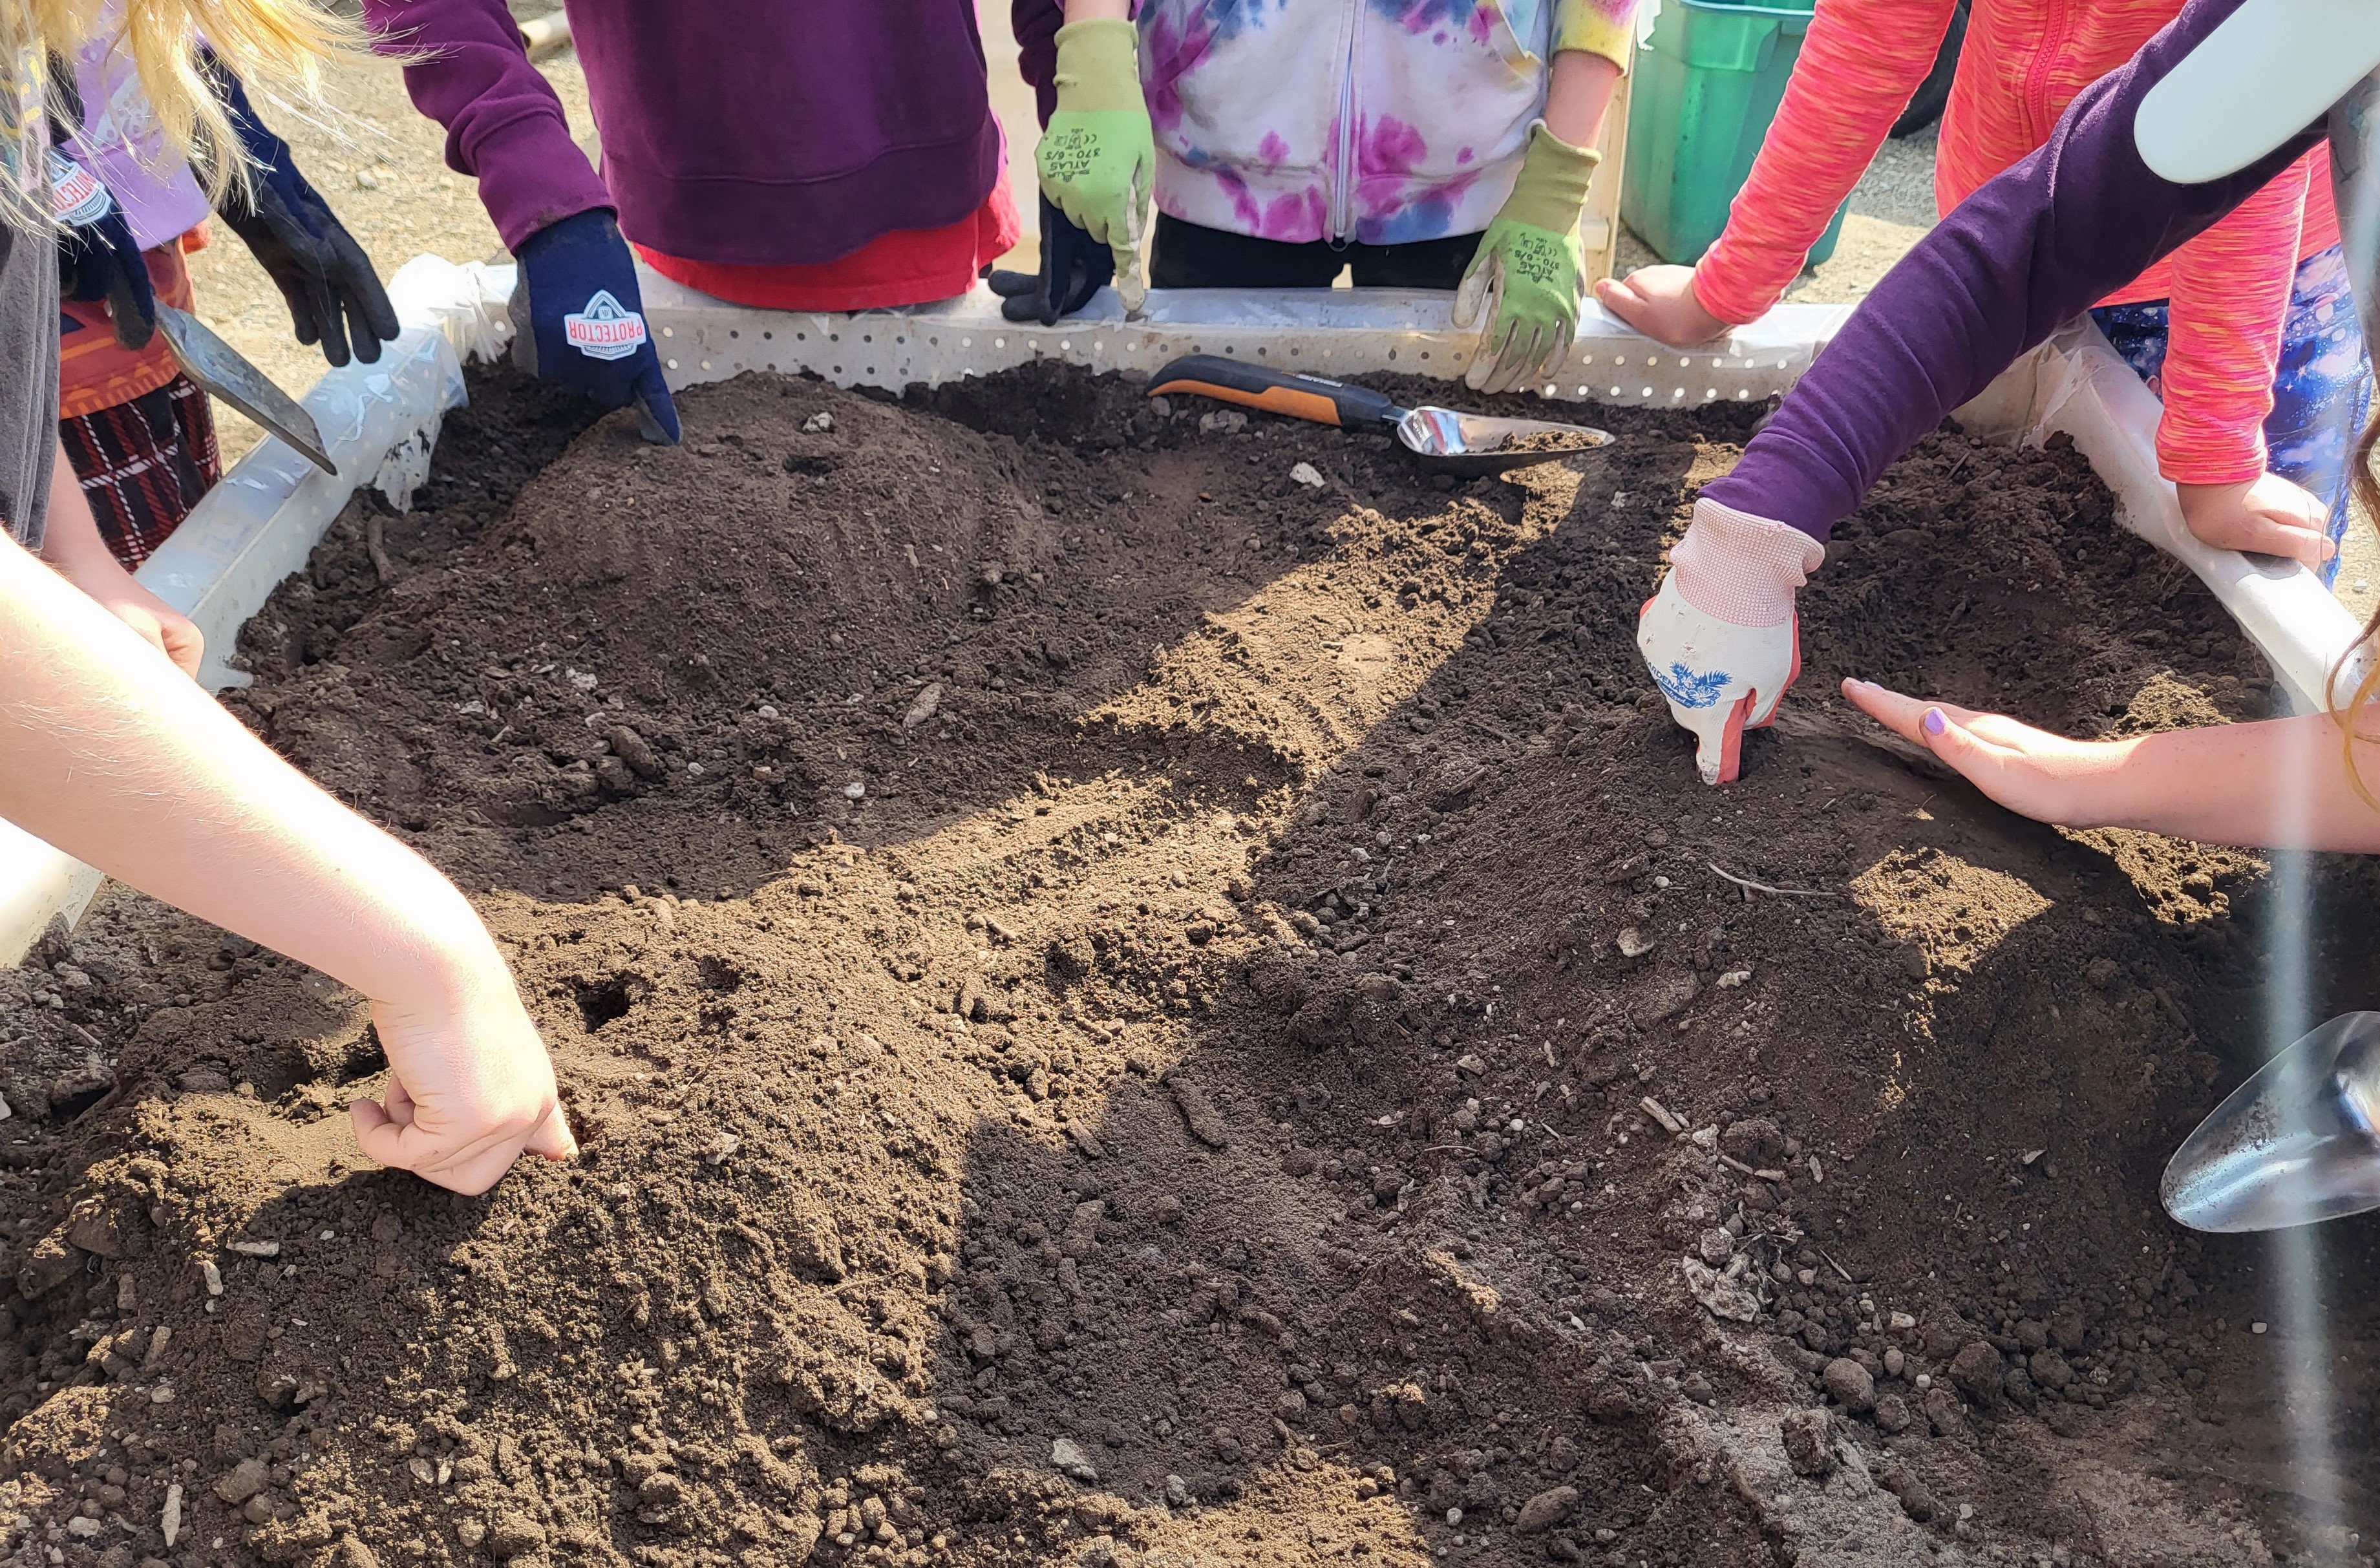 A group of children wearing gloves and bright clothing planting seeds in a patch of dirt